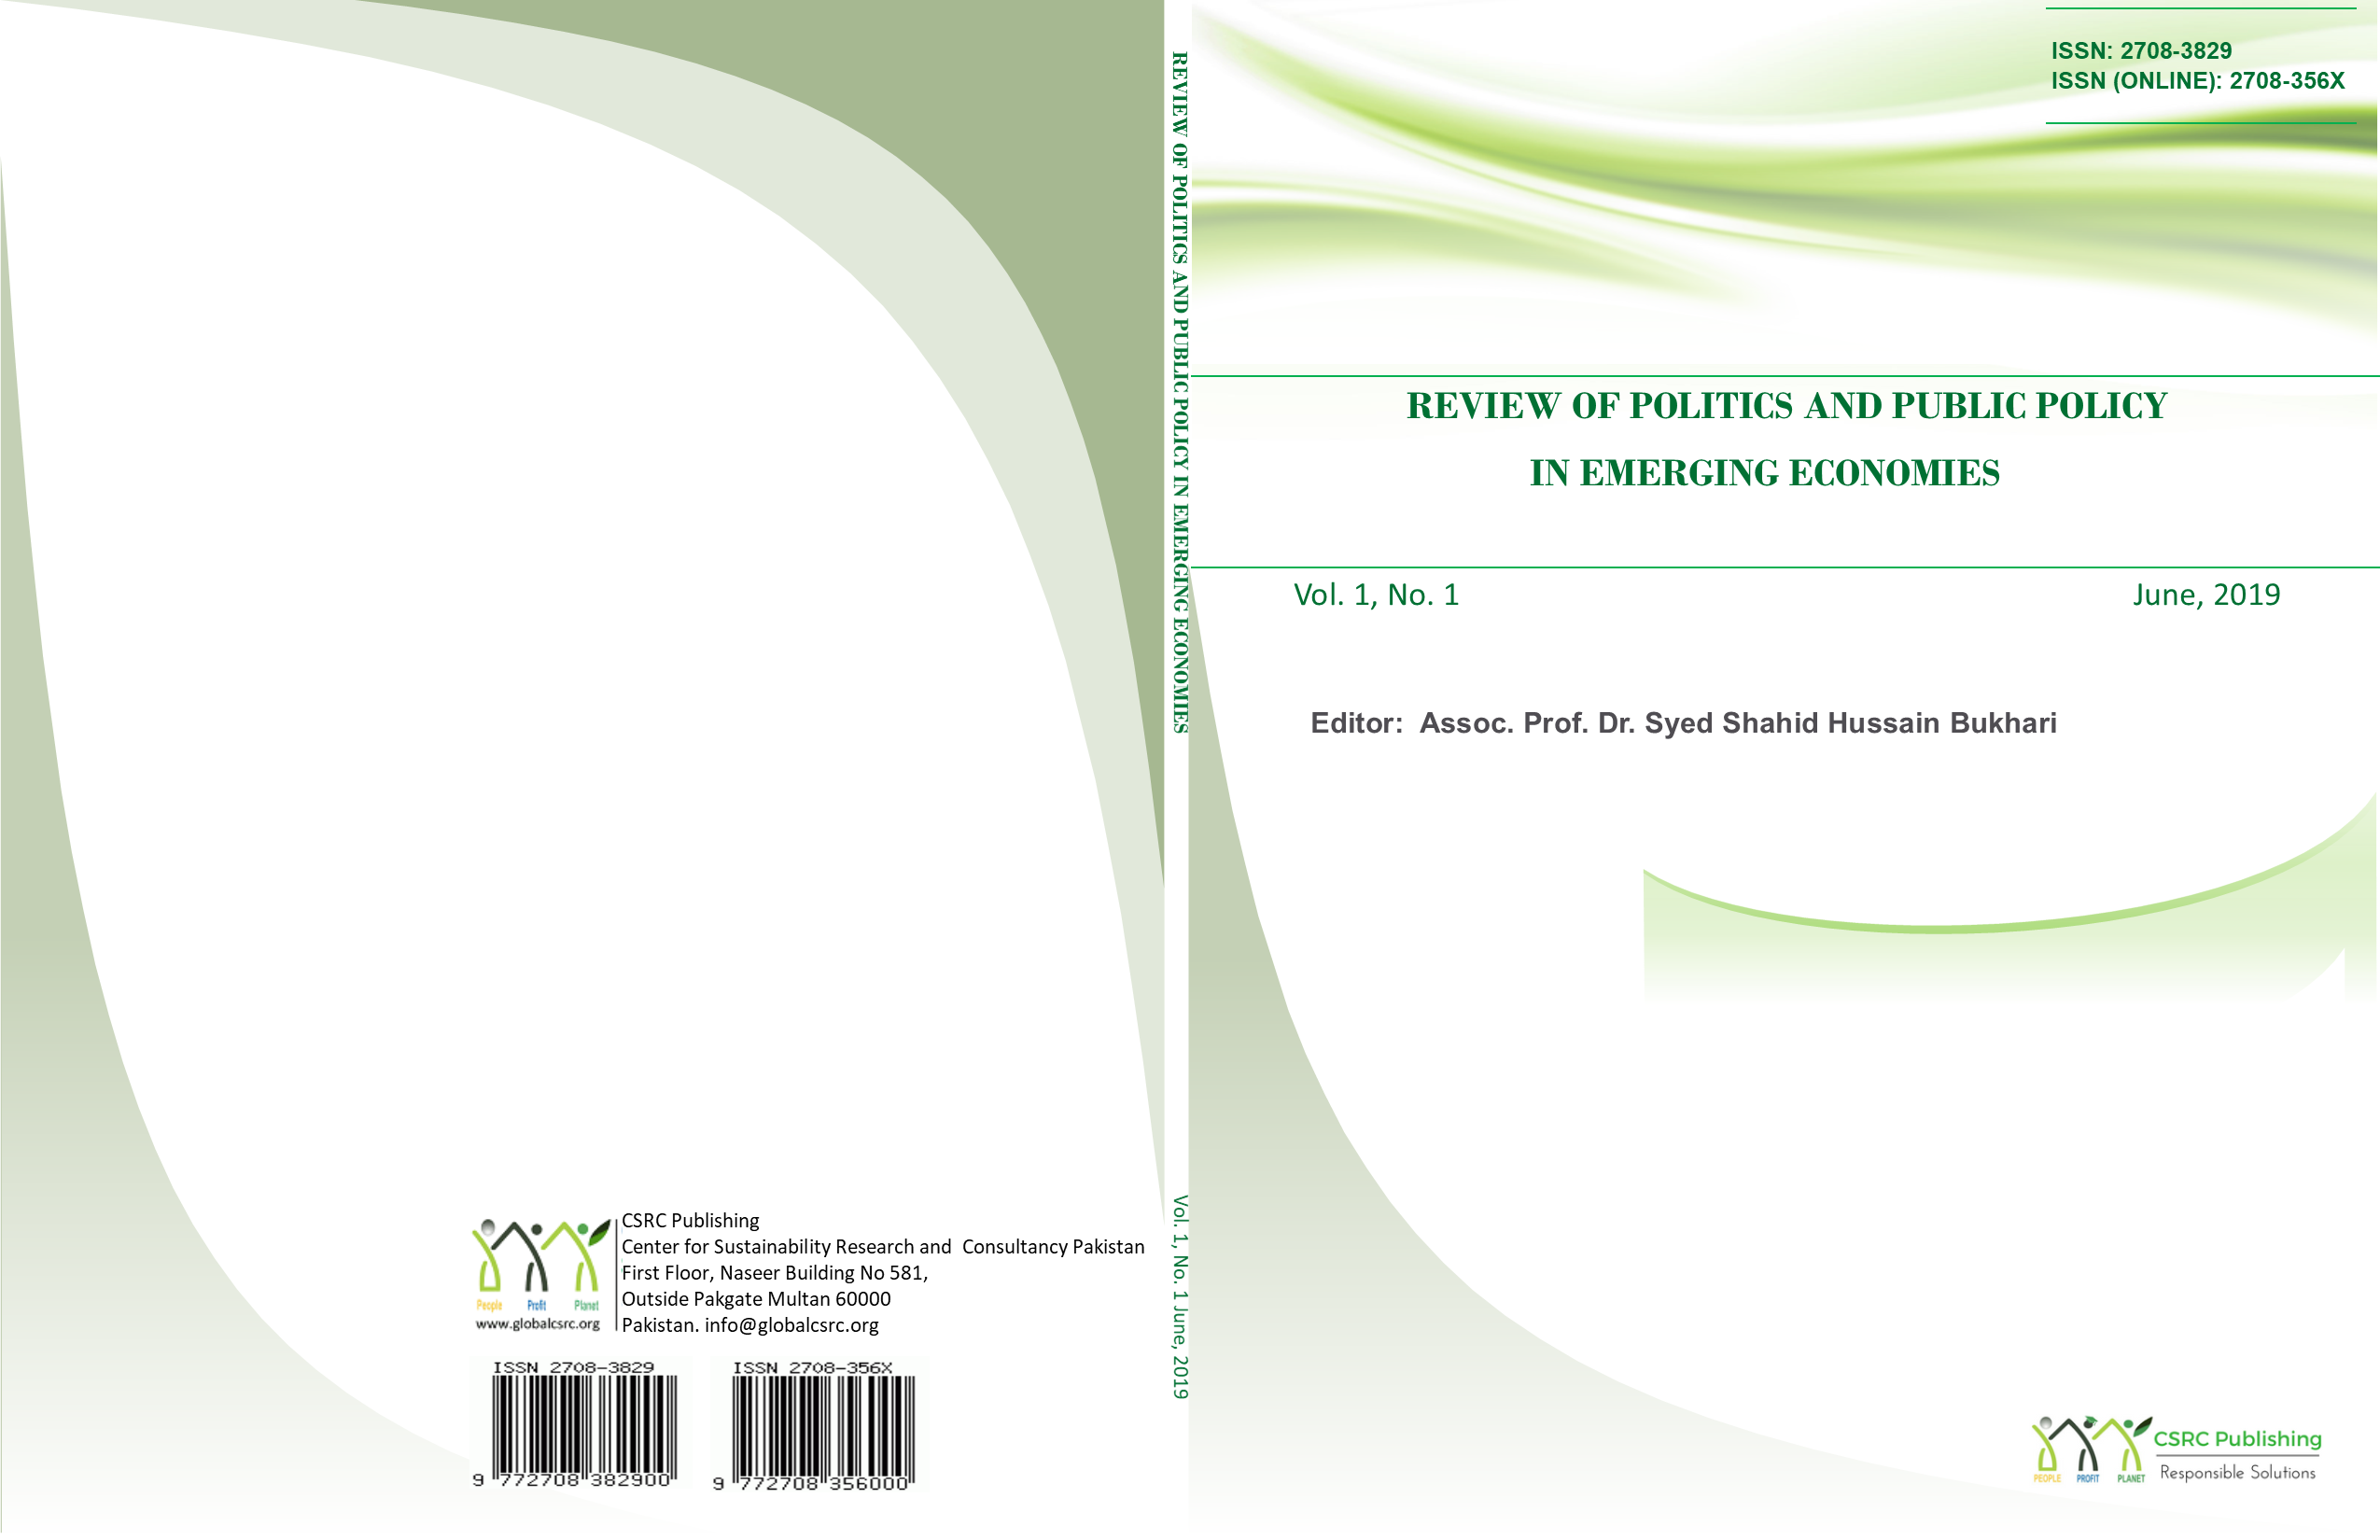 Review of Politics and Public Policy in Emerging Economies (ROPE)